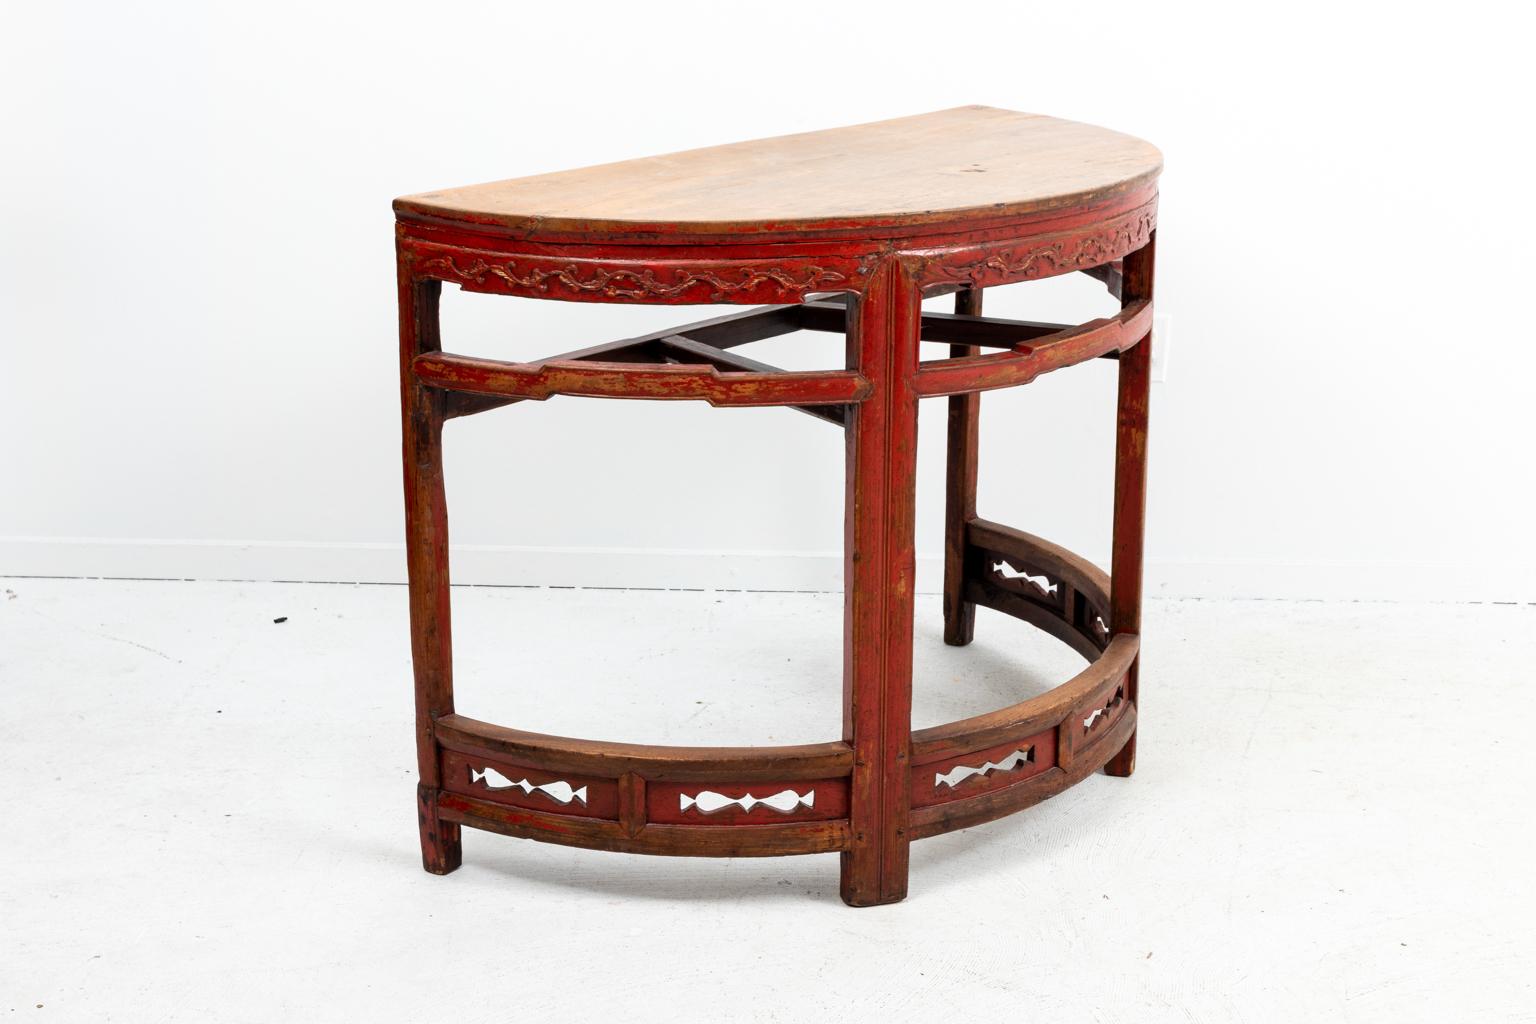 Wood Painted Chinese Demilune Tables